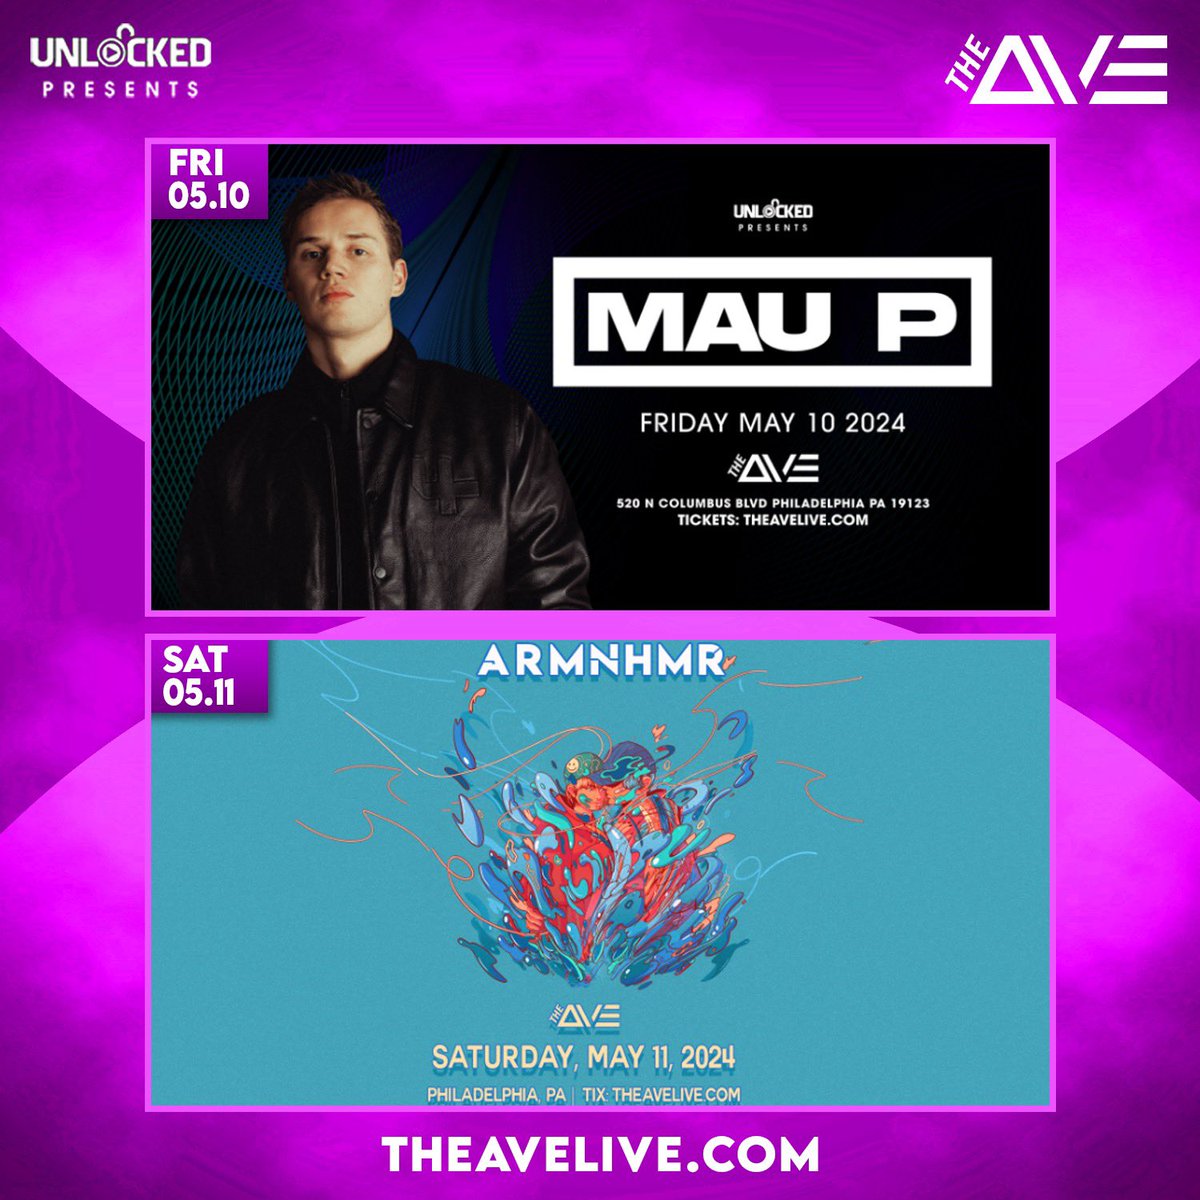 Weekend Lineup 🔥 TONIGHT Mau P is taking over #TheAve with support from Garvin and Silvertone, and this SATURDAY ARMNHMR will be joining us with support from Special Guest Cyclops, plus support from Swole Sauce and Blankages- Remaining Tickets at TheAveLive.com